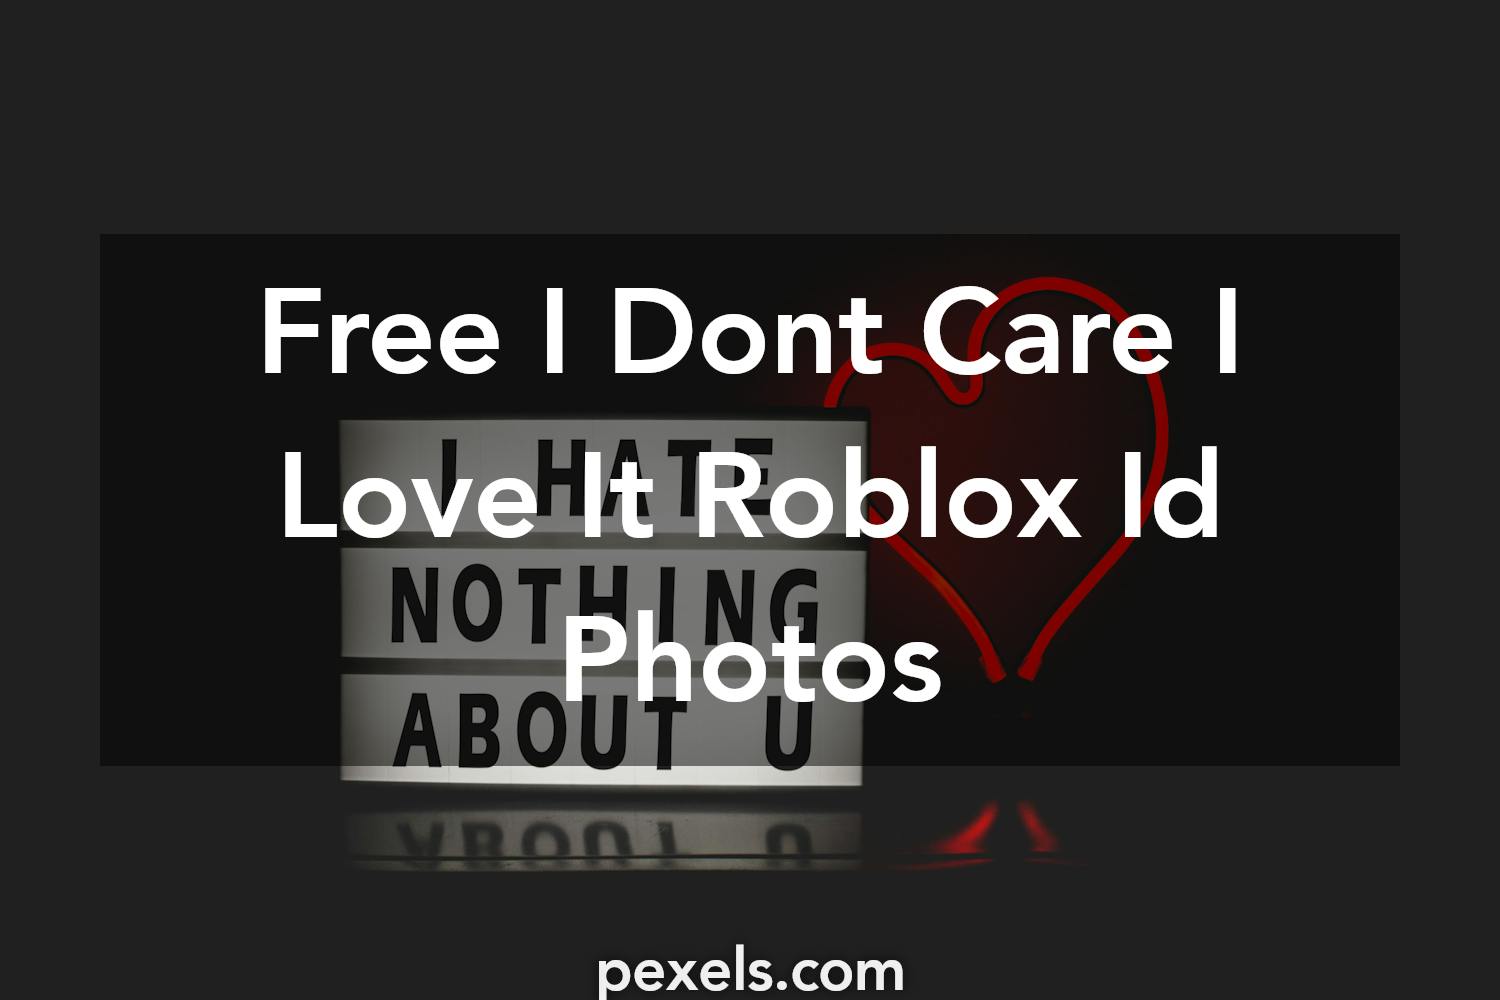 meltedway roblox profile